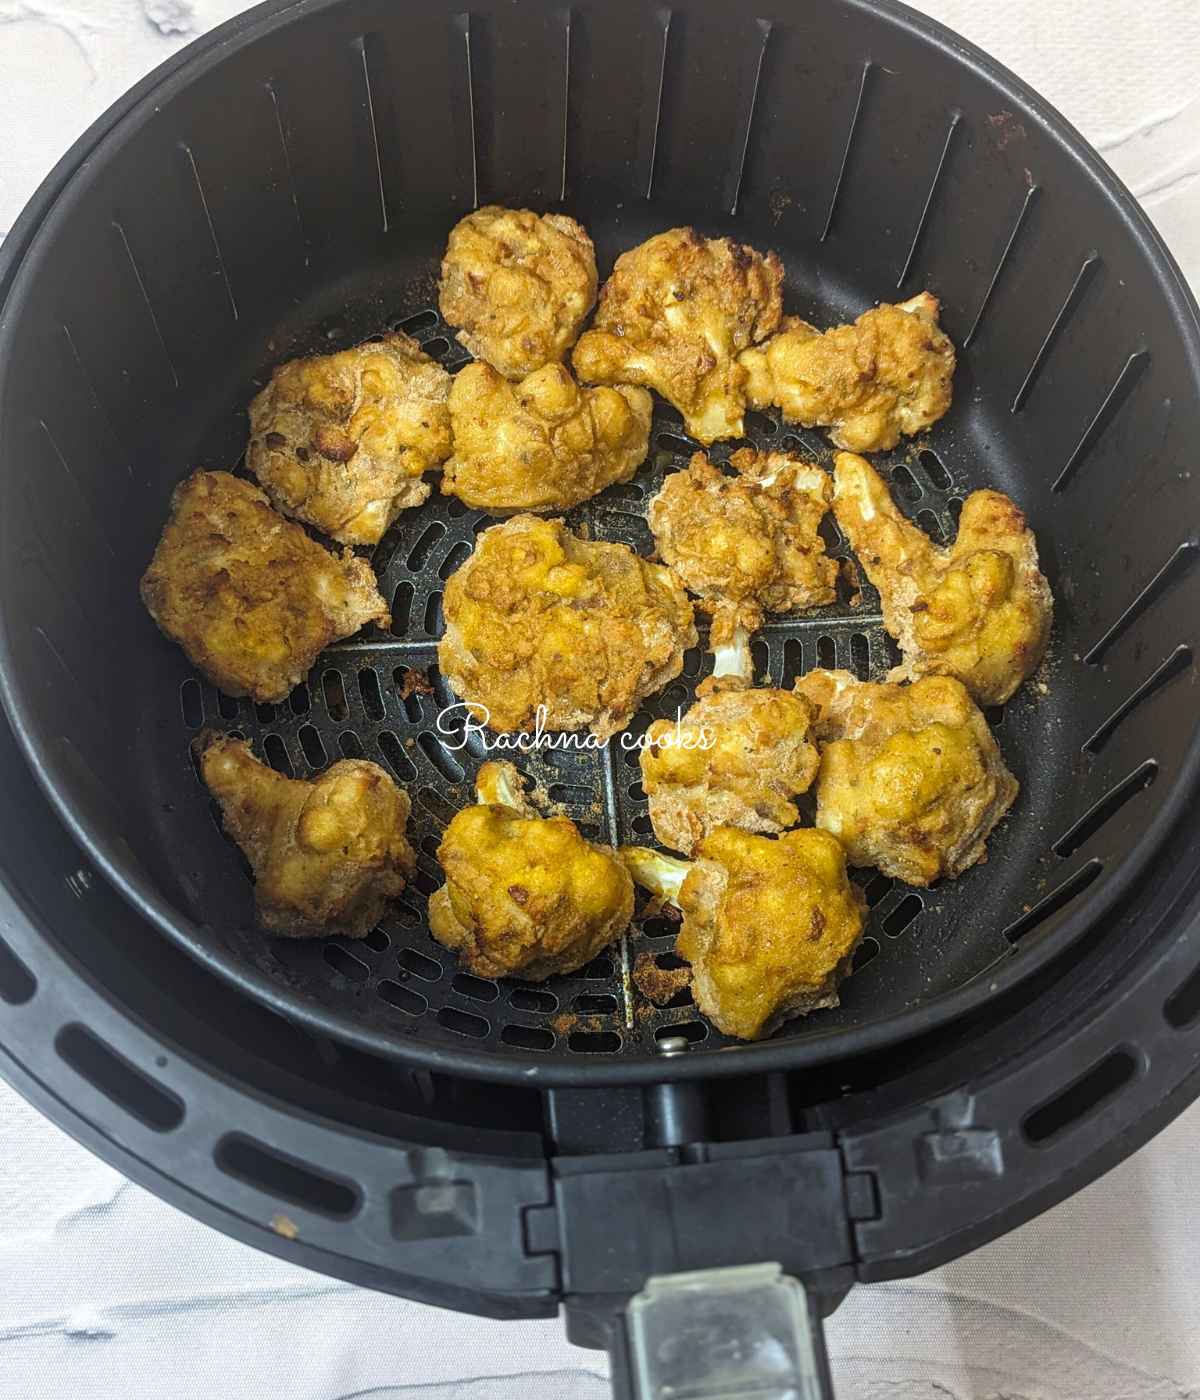 Half cooked cauliflower florets brushed with oil and placed back in the basket.